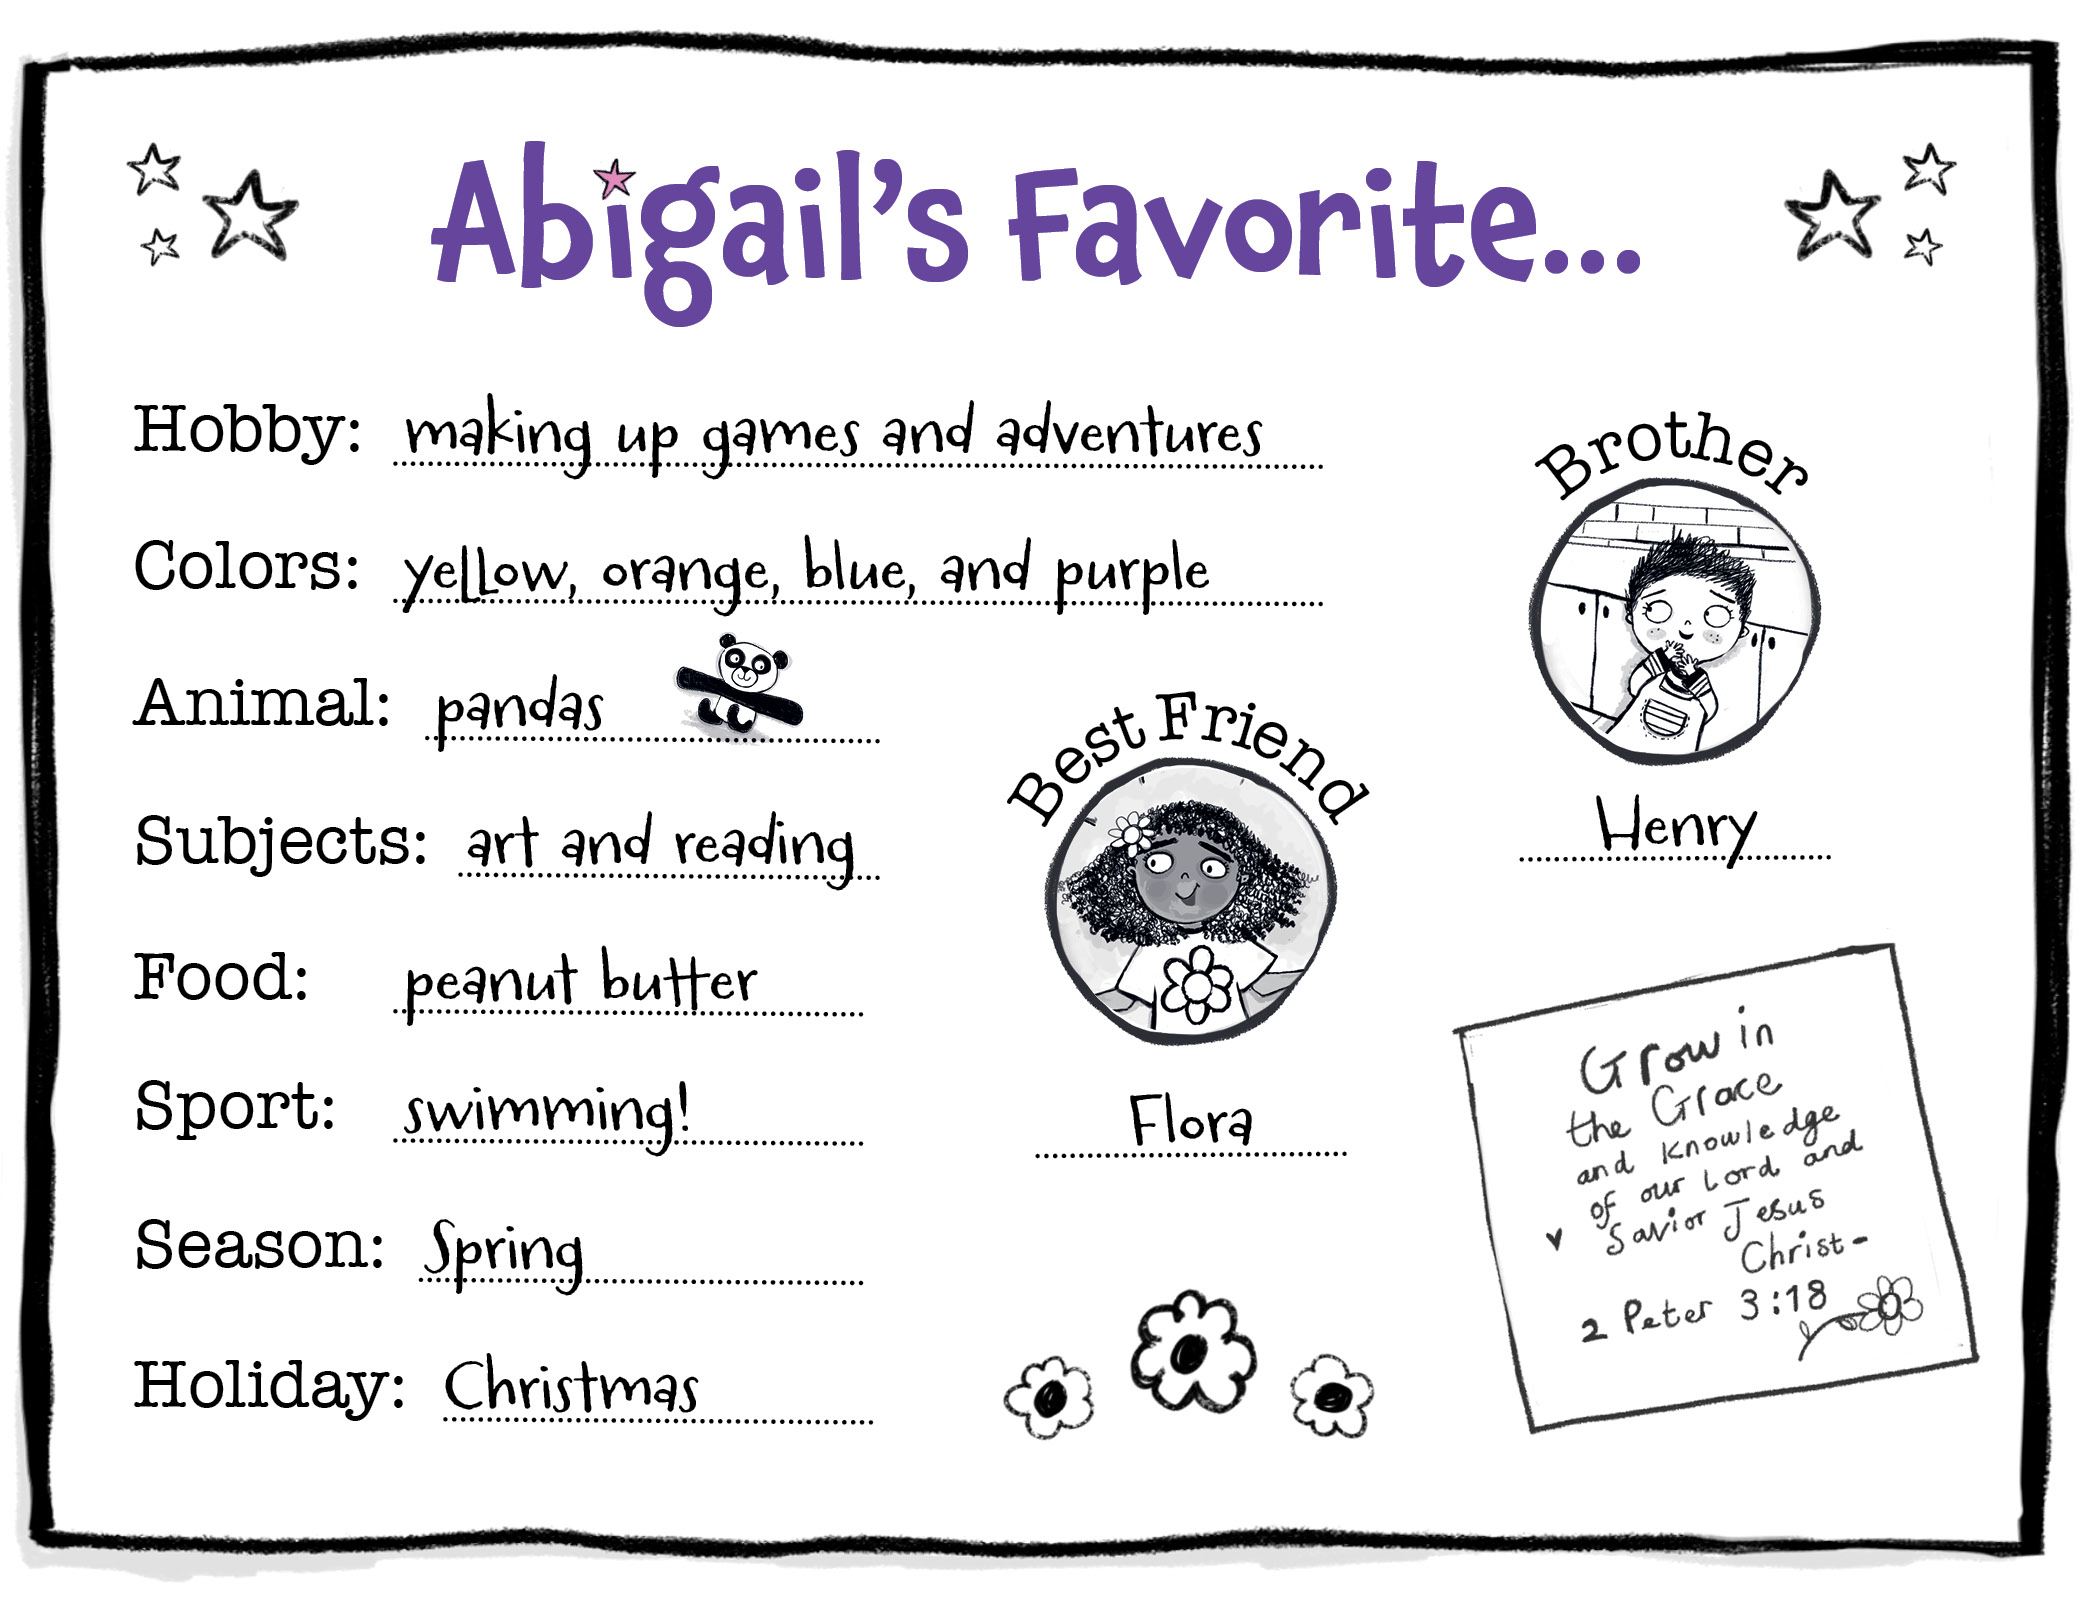 A list of Abigail's favorites
Hobby: making up games and adventures
Colors: yellow, orange, blue, purple
Animal: panda
Subjects: art and reading
Food: peanut butter
Brother: Henry (he's her only brother!)
Best friend: Flora
Sport: swimming
Season: spring
Holiday: Christmas